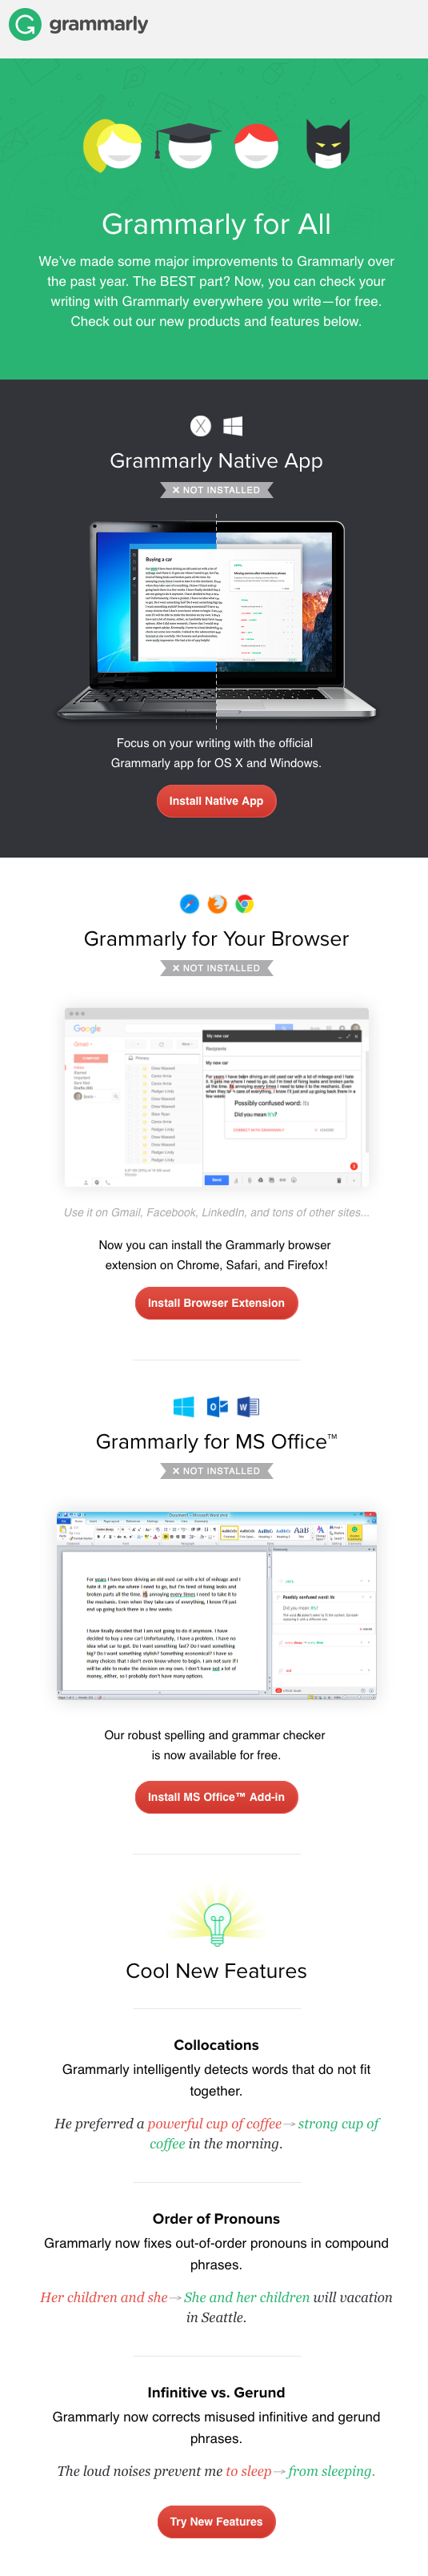 Grammarly For All